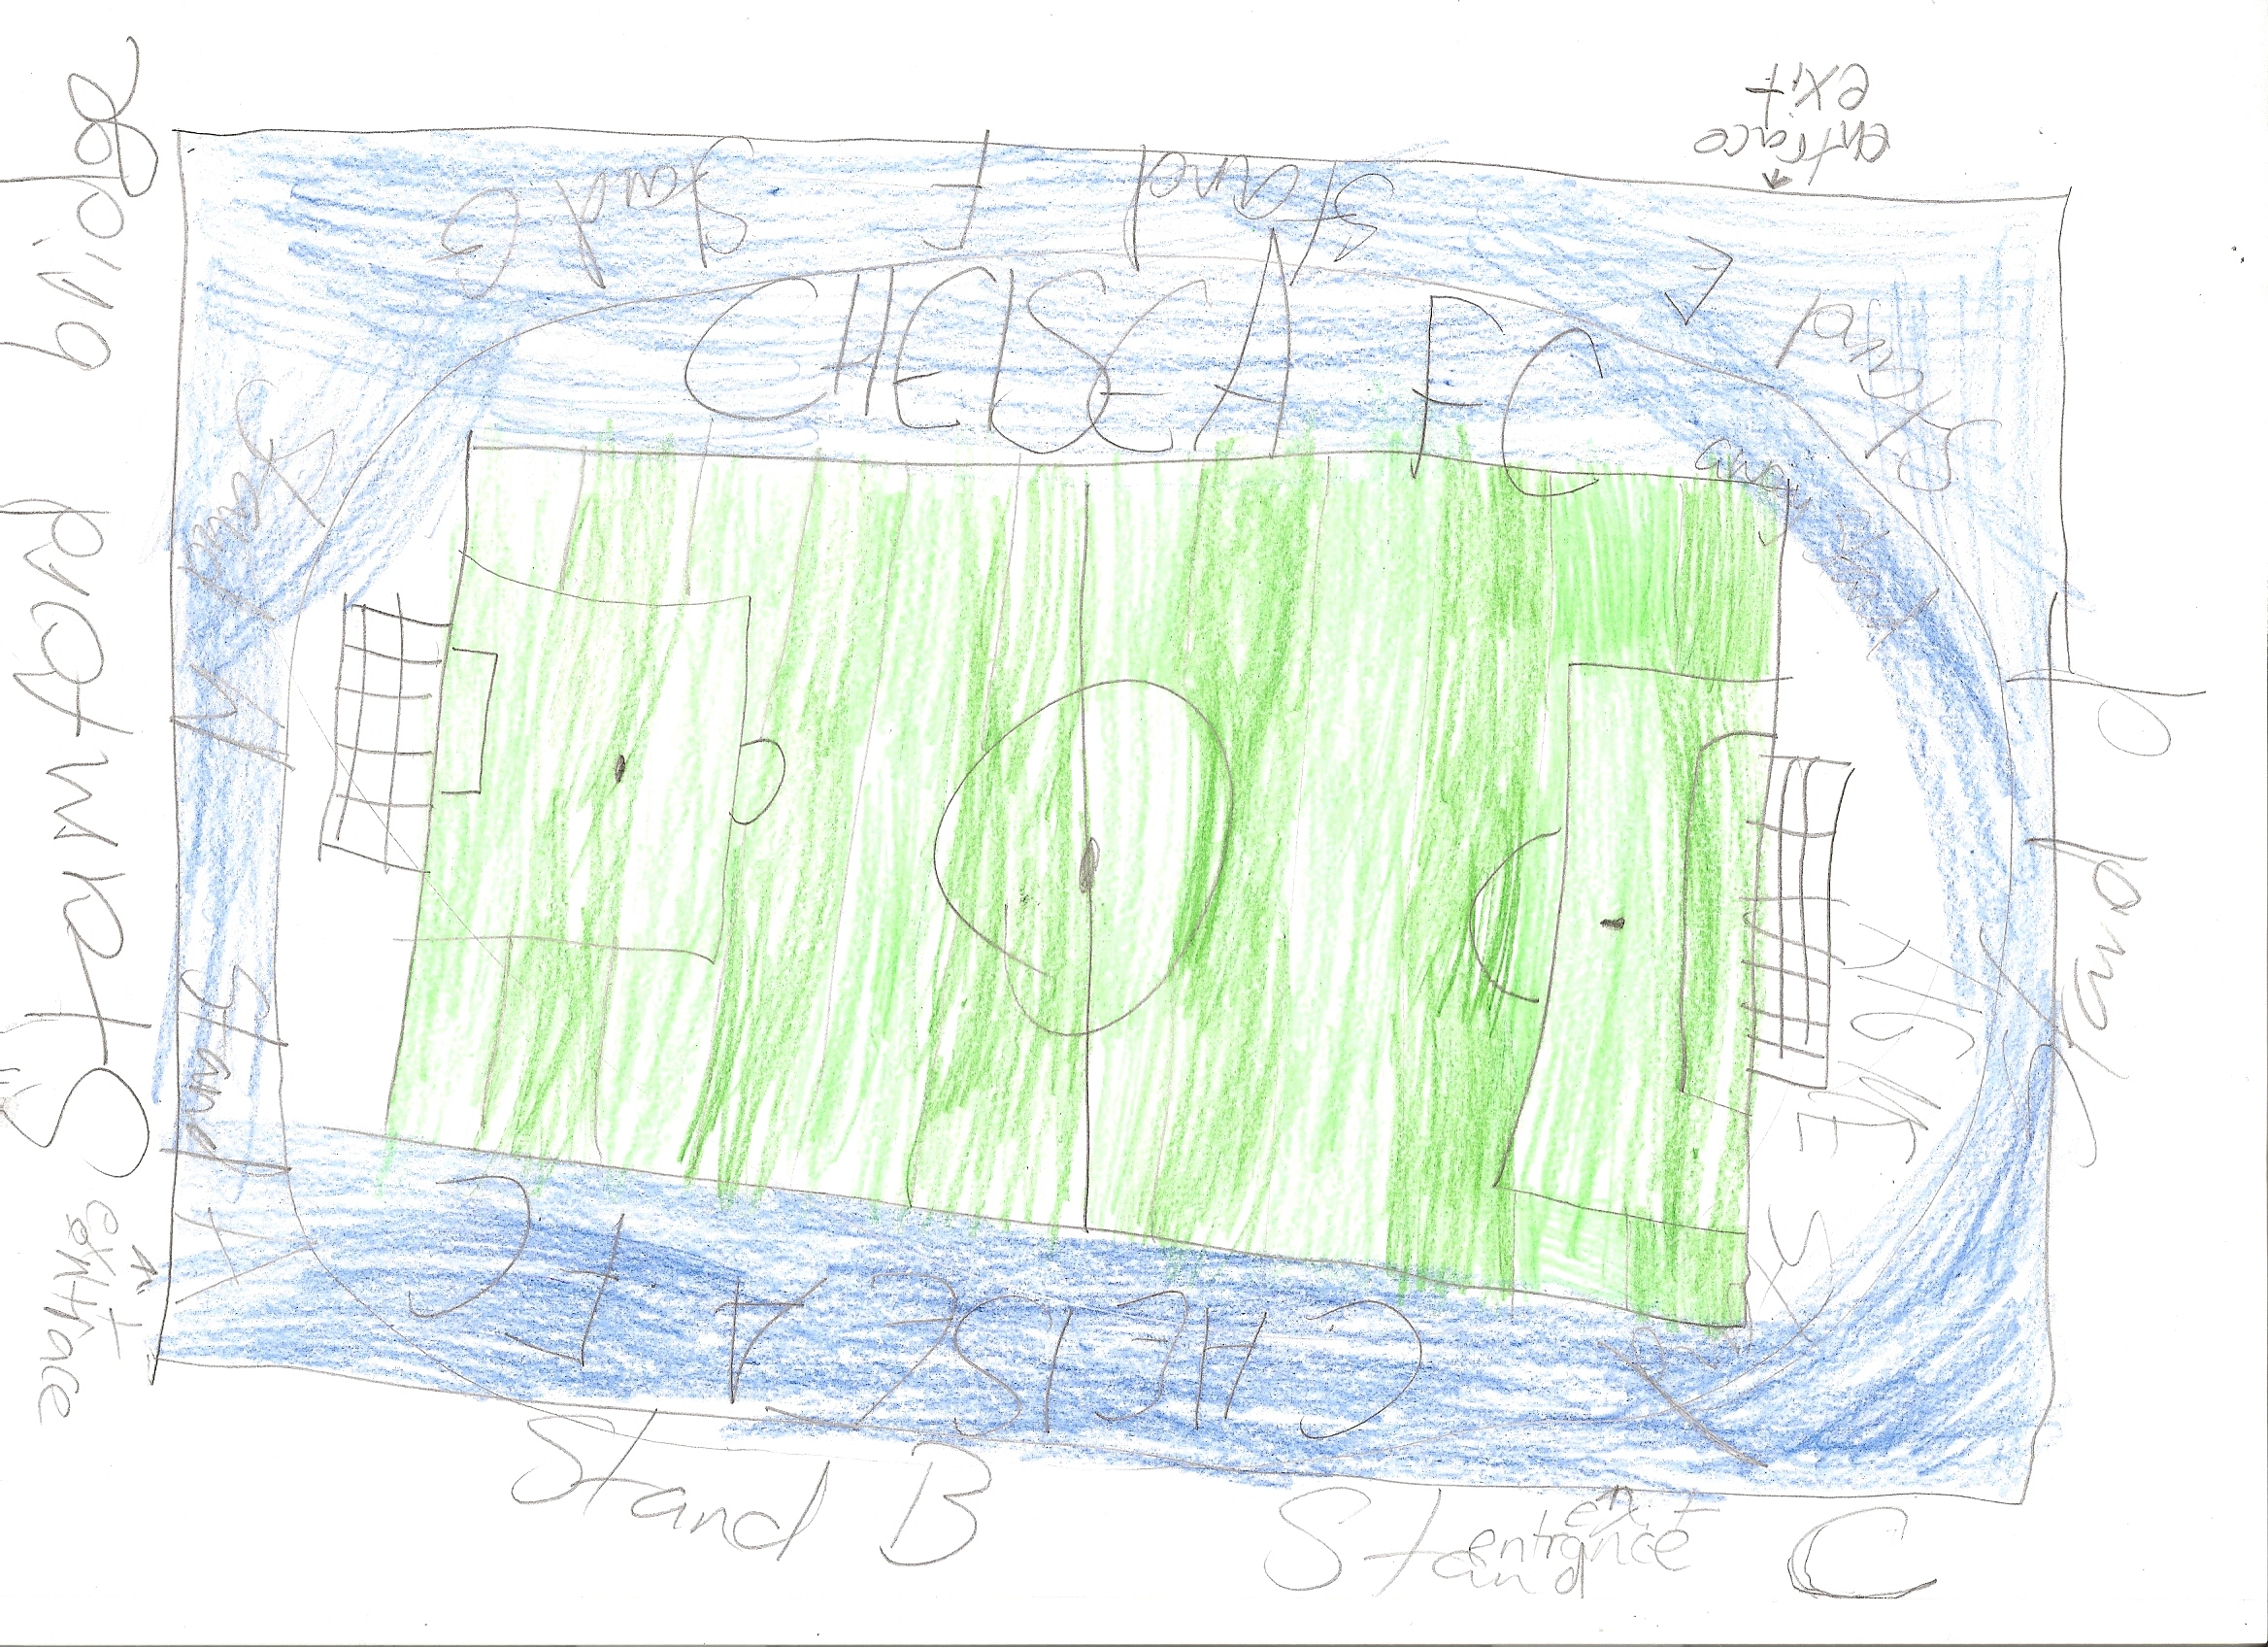 Soccer. Football. Pitch Measurements. Greeting Card by Tom Hill